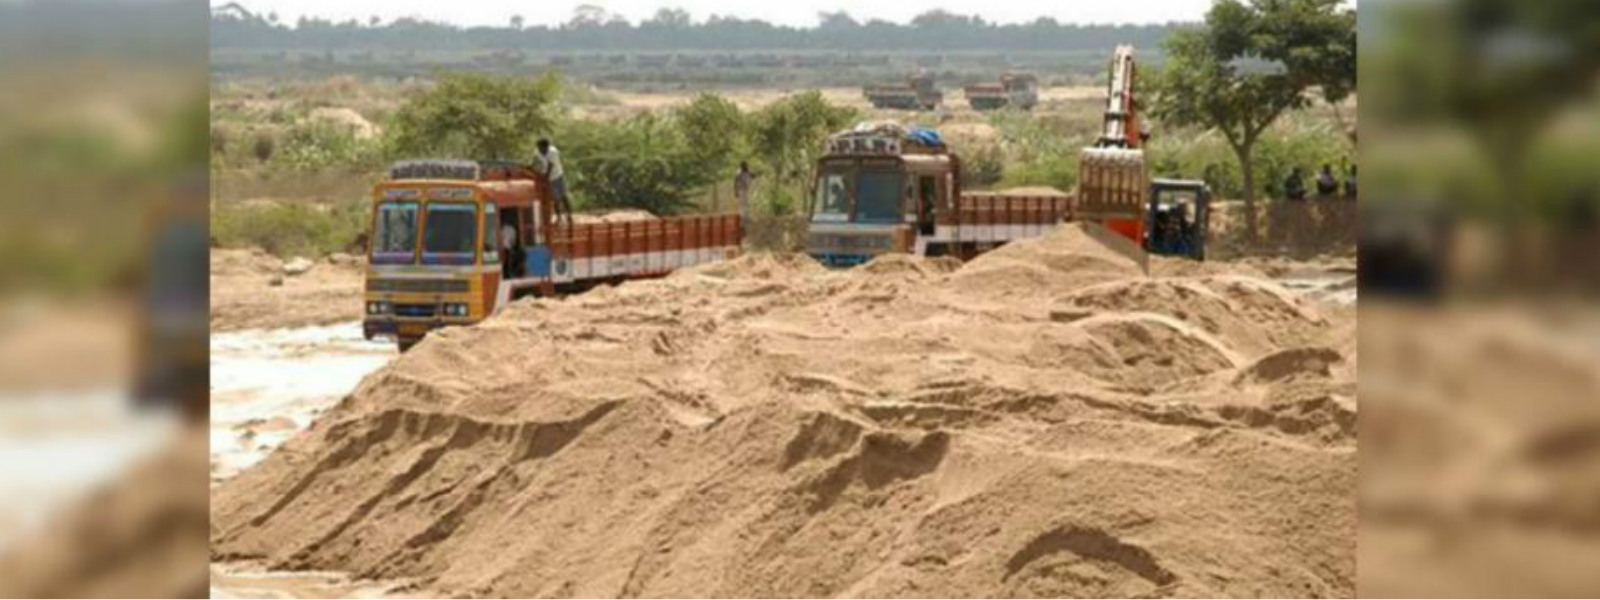 Sand mining racket exposed in Kantale